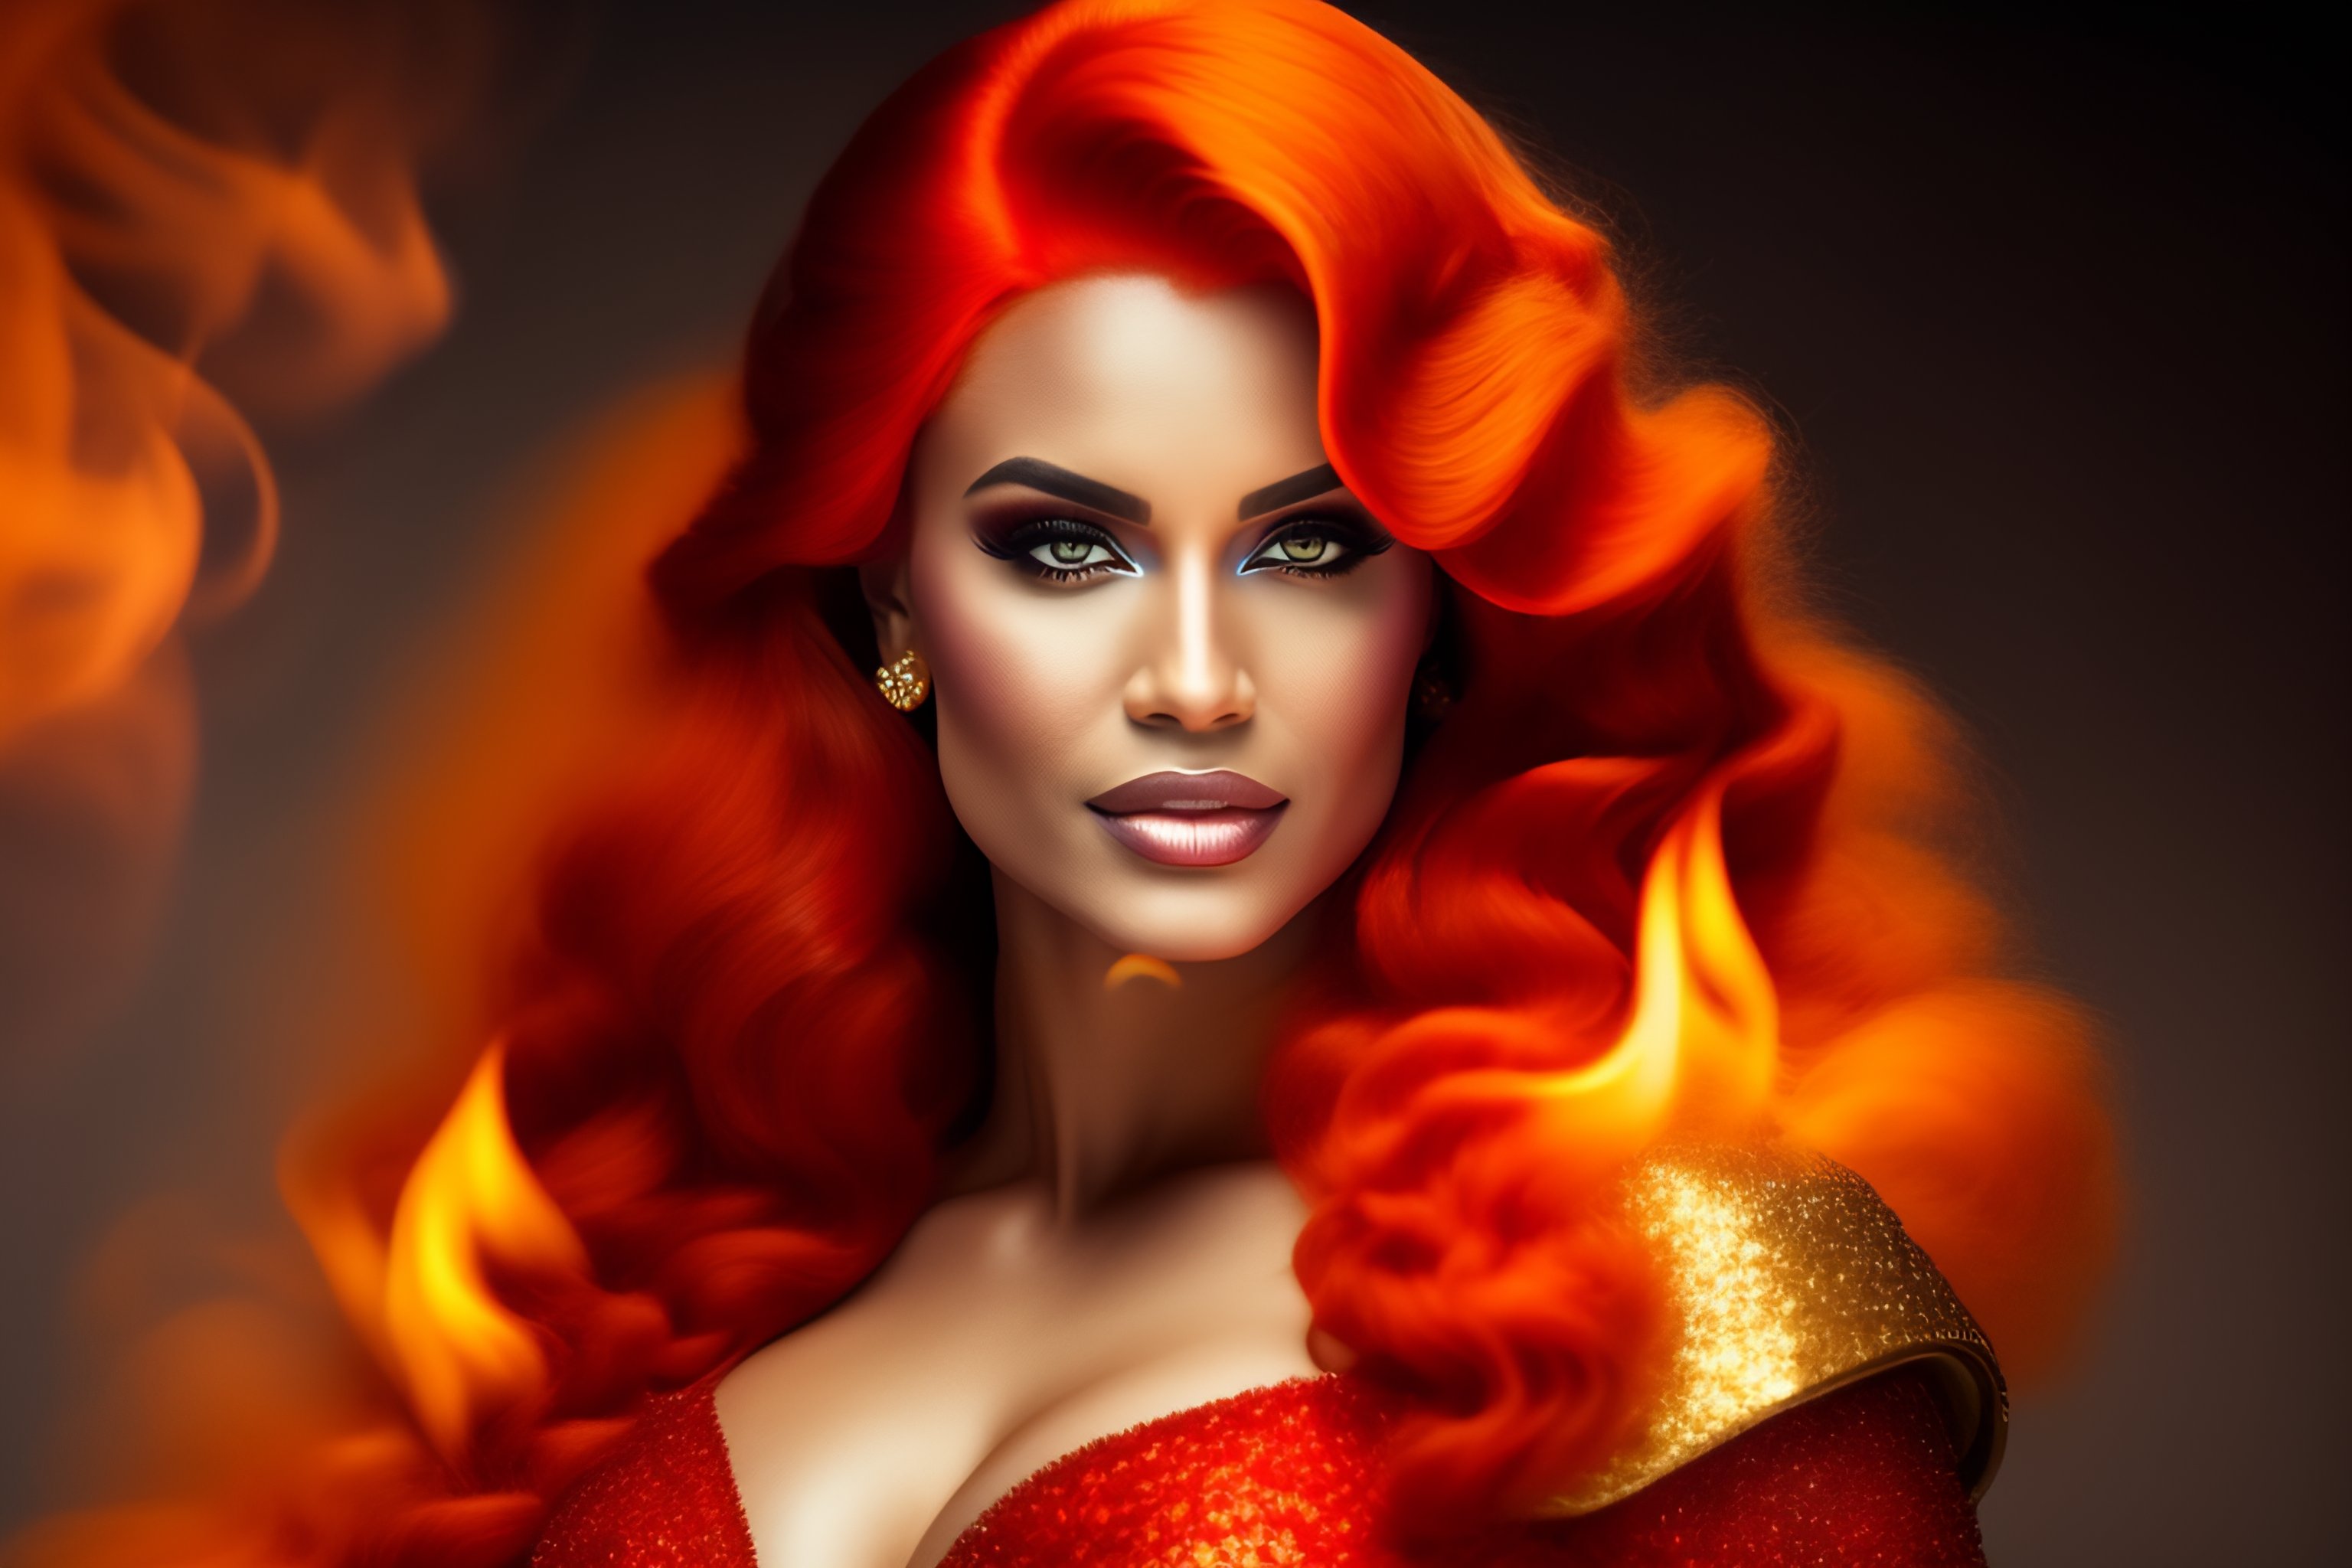 Lexica - A beautiful woman with giant chest in a beautiful dress with red  flaming hair in a golden dress